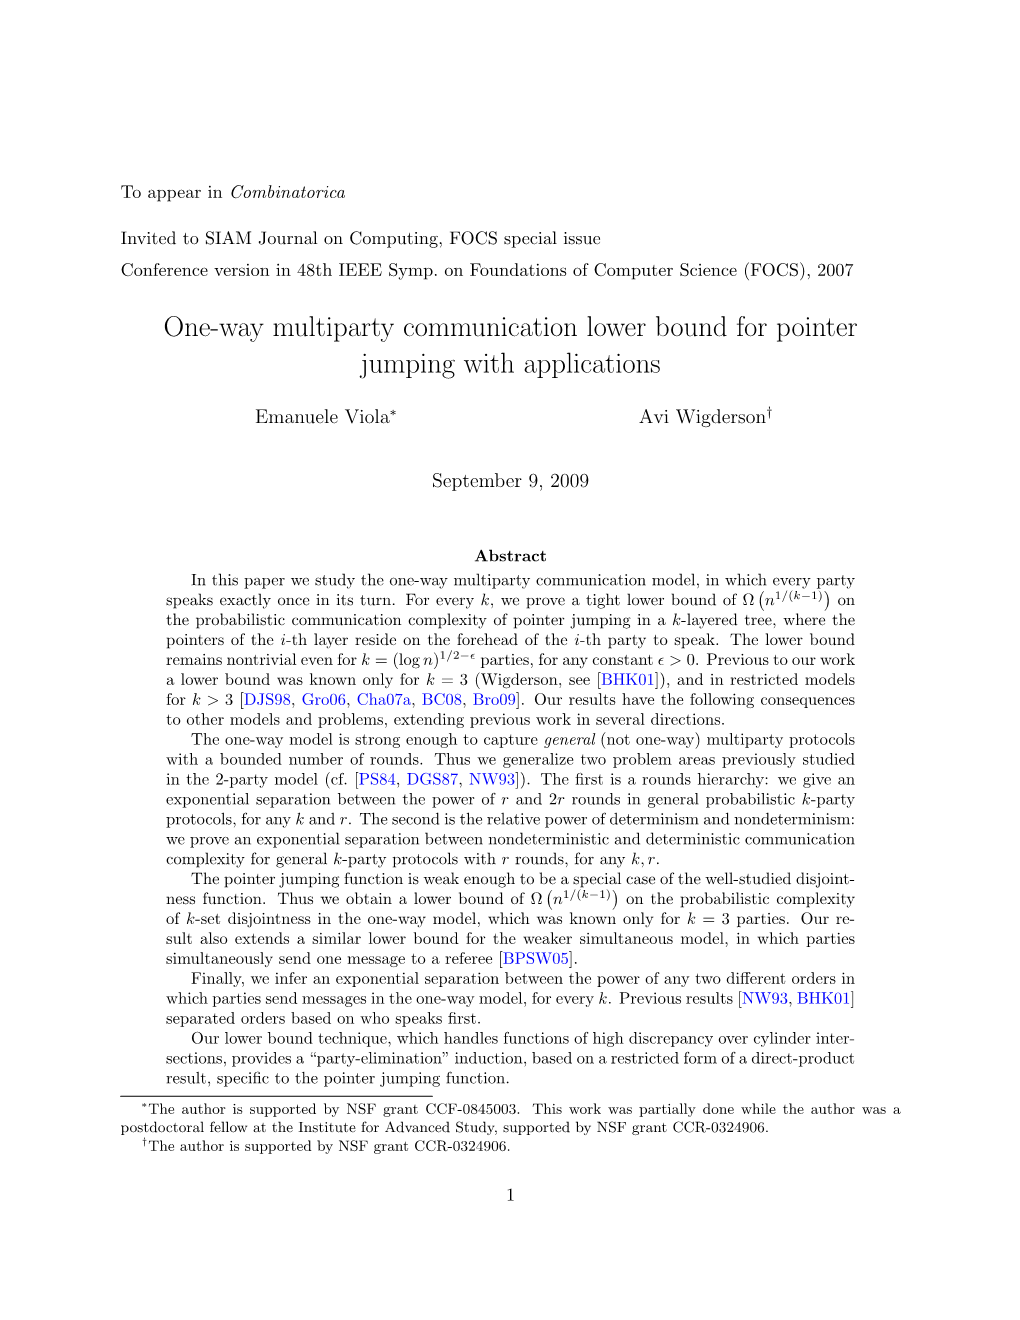 One-Way Multiparty Communication Lower Bound for Pointer Jumping with Applications